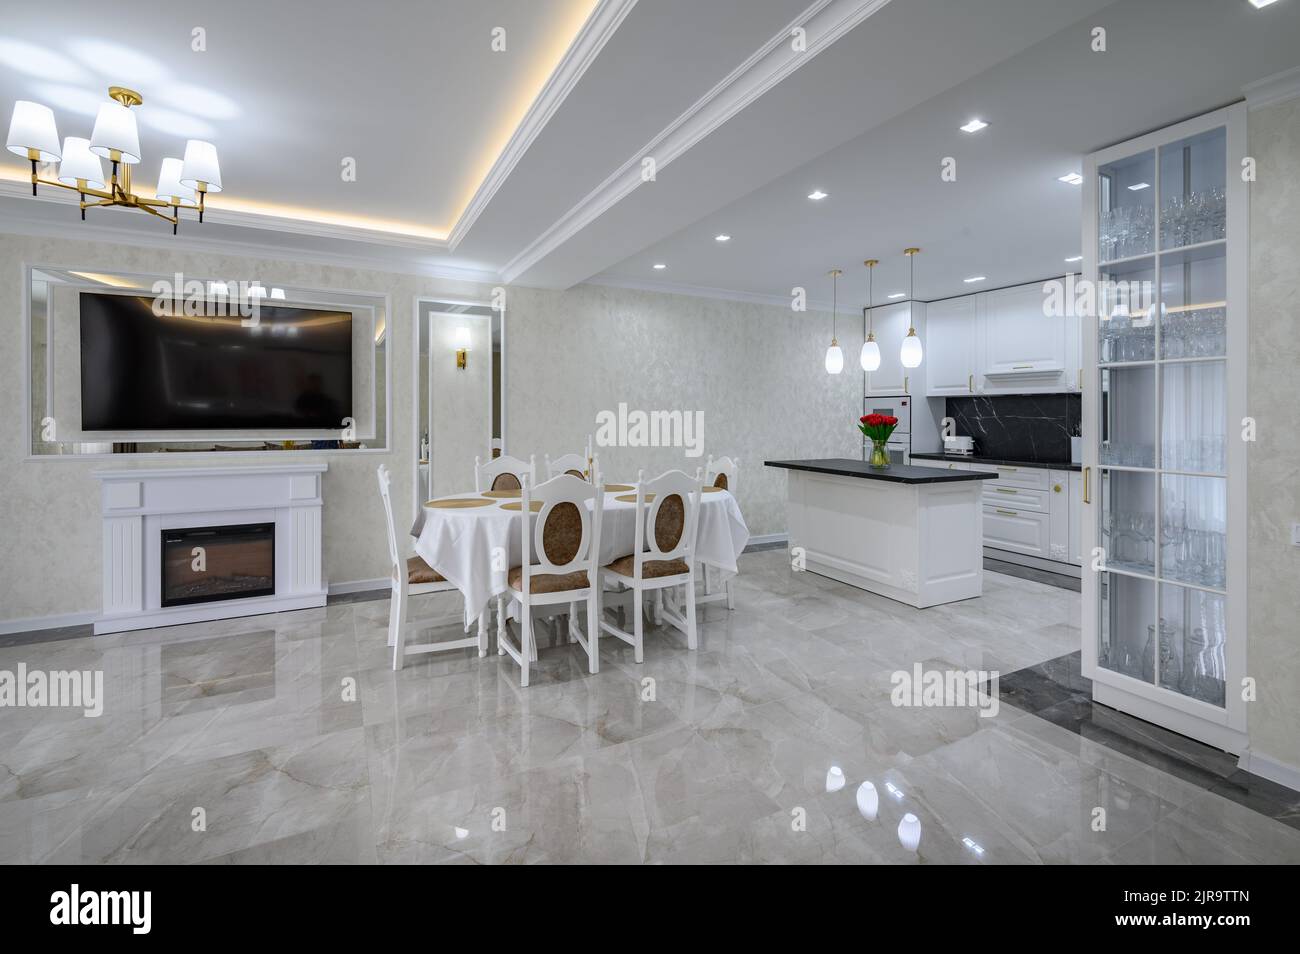 Well designed large domestic kitchen with marble floor Stock Photo